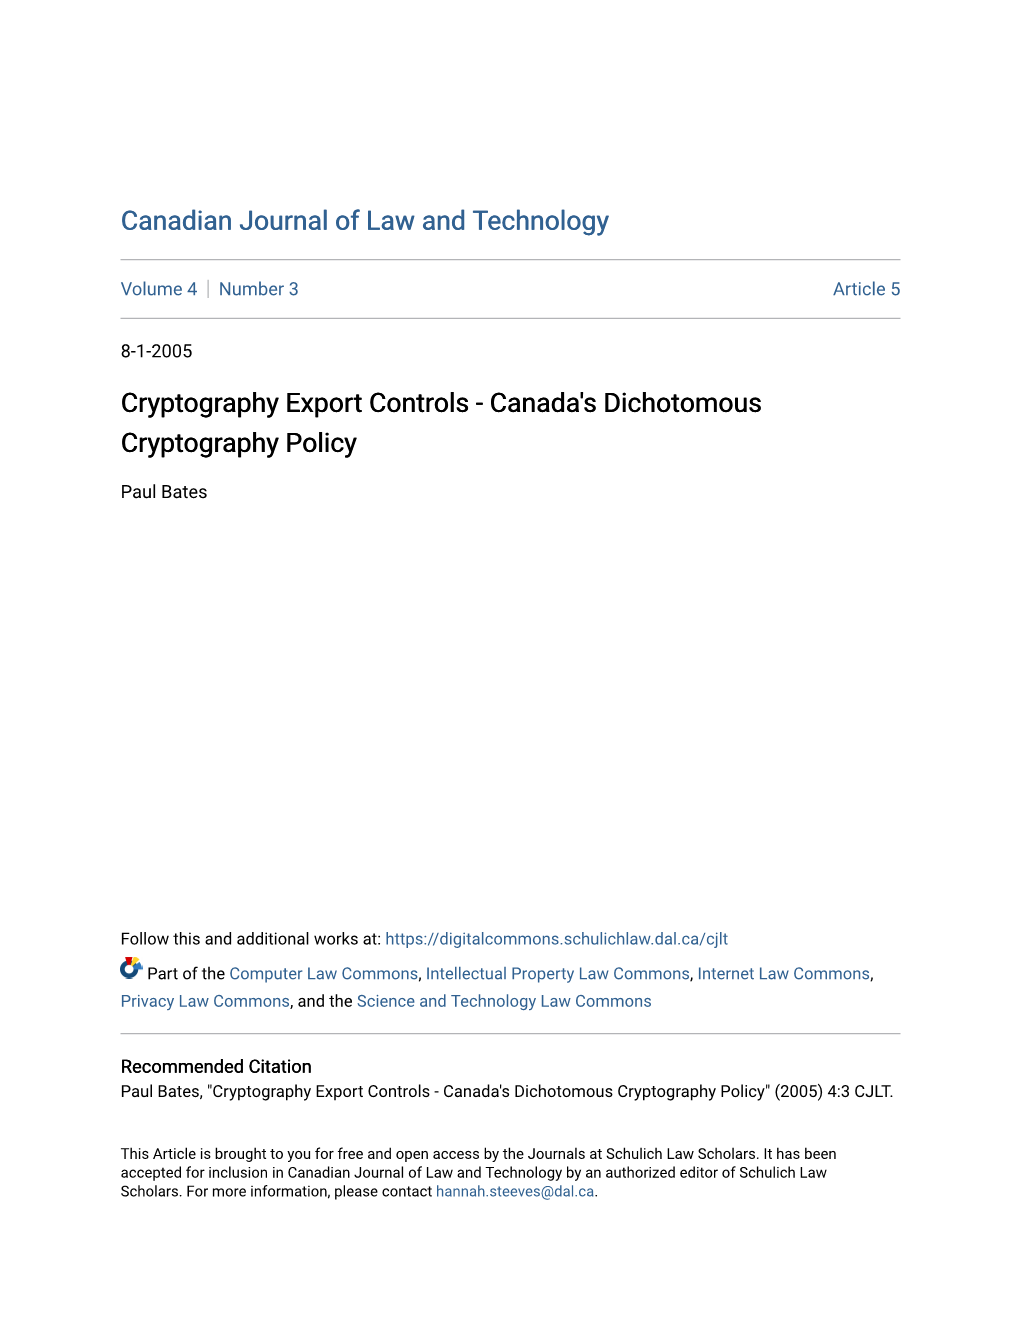 Cryptography Export Controls - Canada's Dichotomous Cryptography Policy